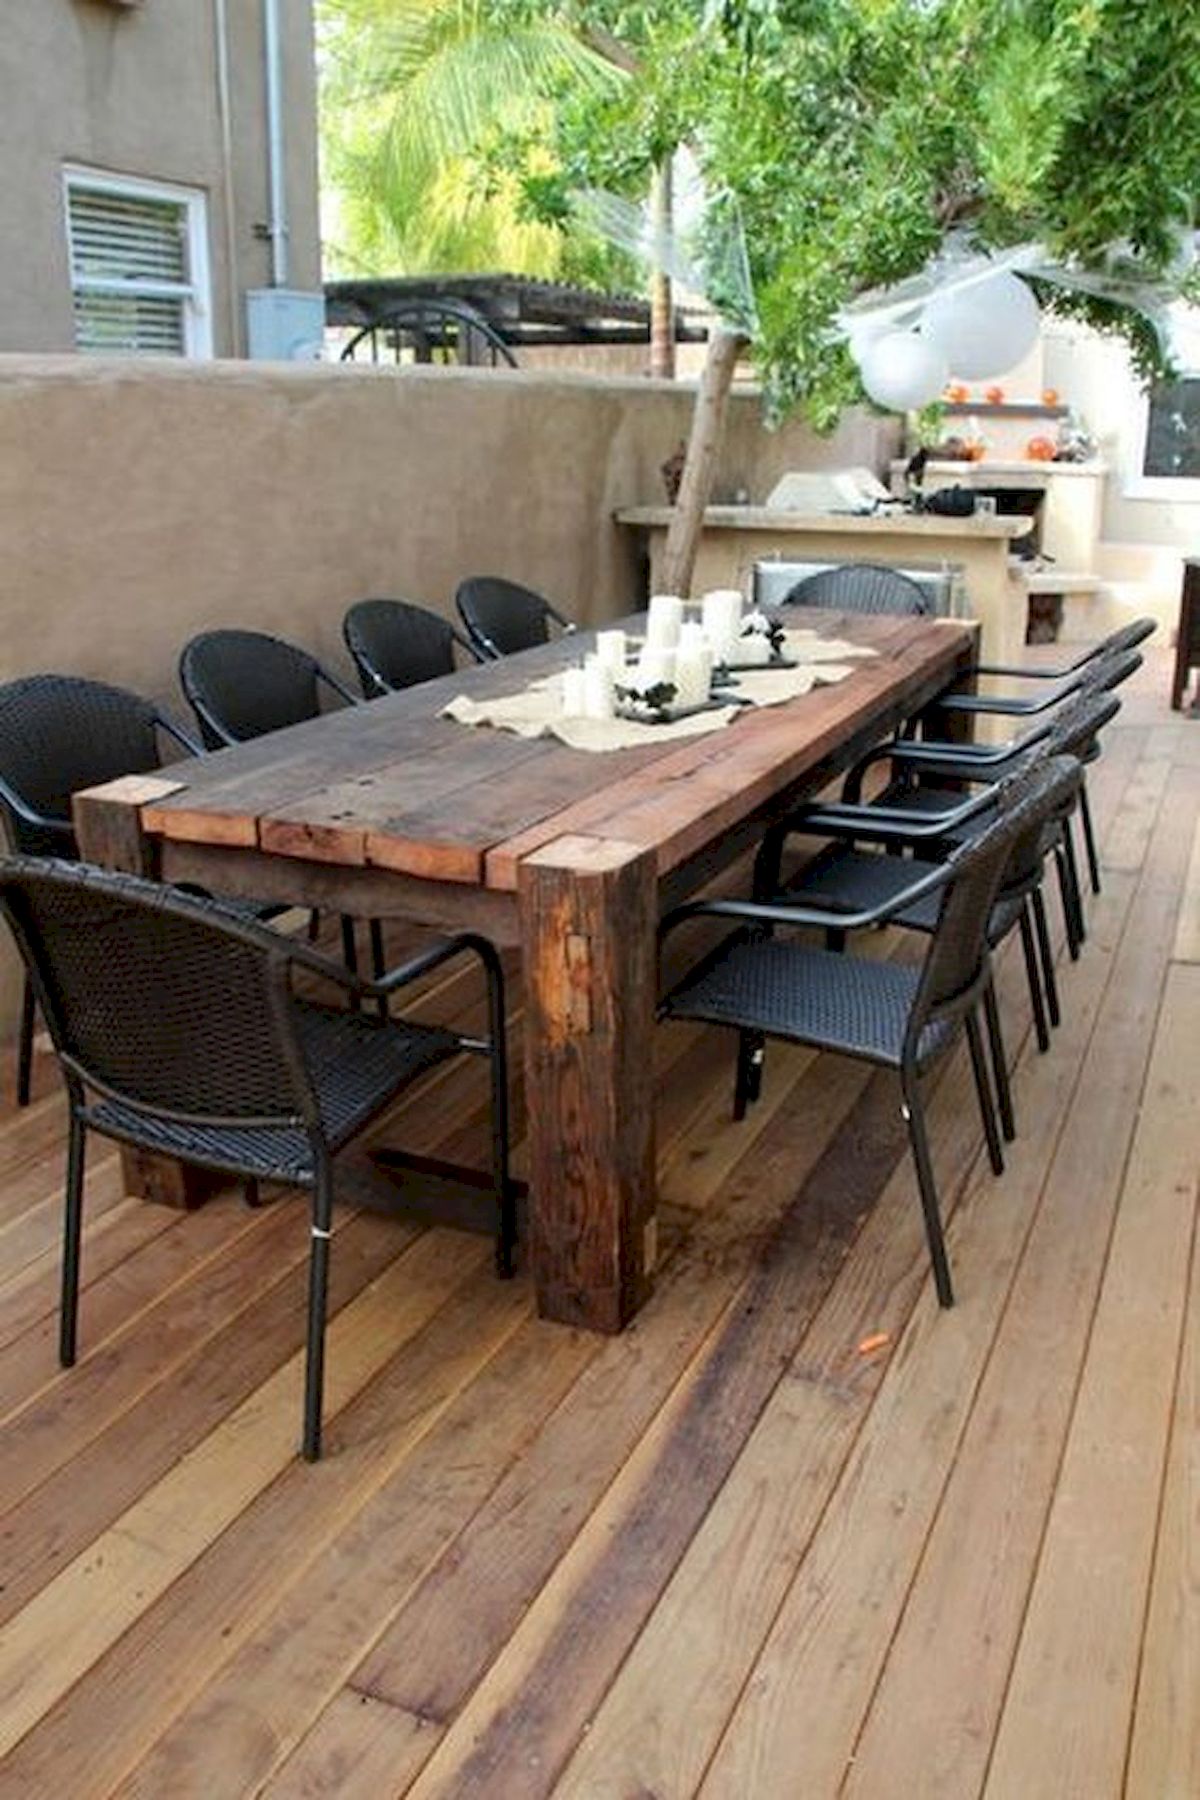 50 Amazing DIY Projects Outdoor Furniture Design Ideas (9)